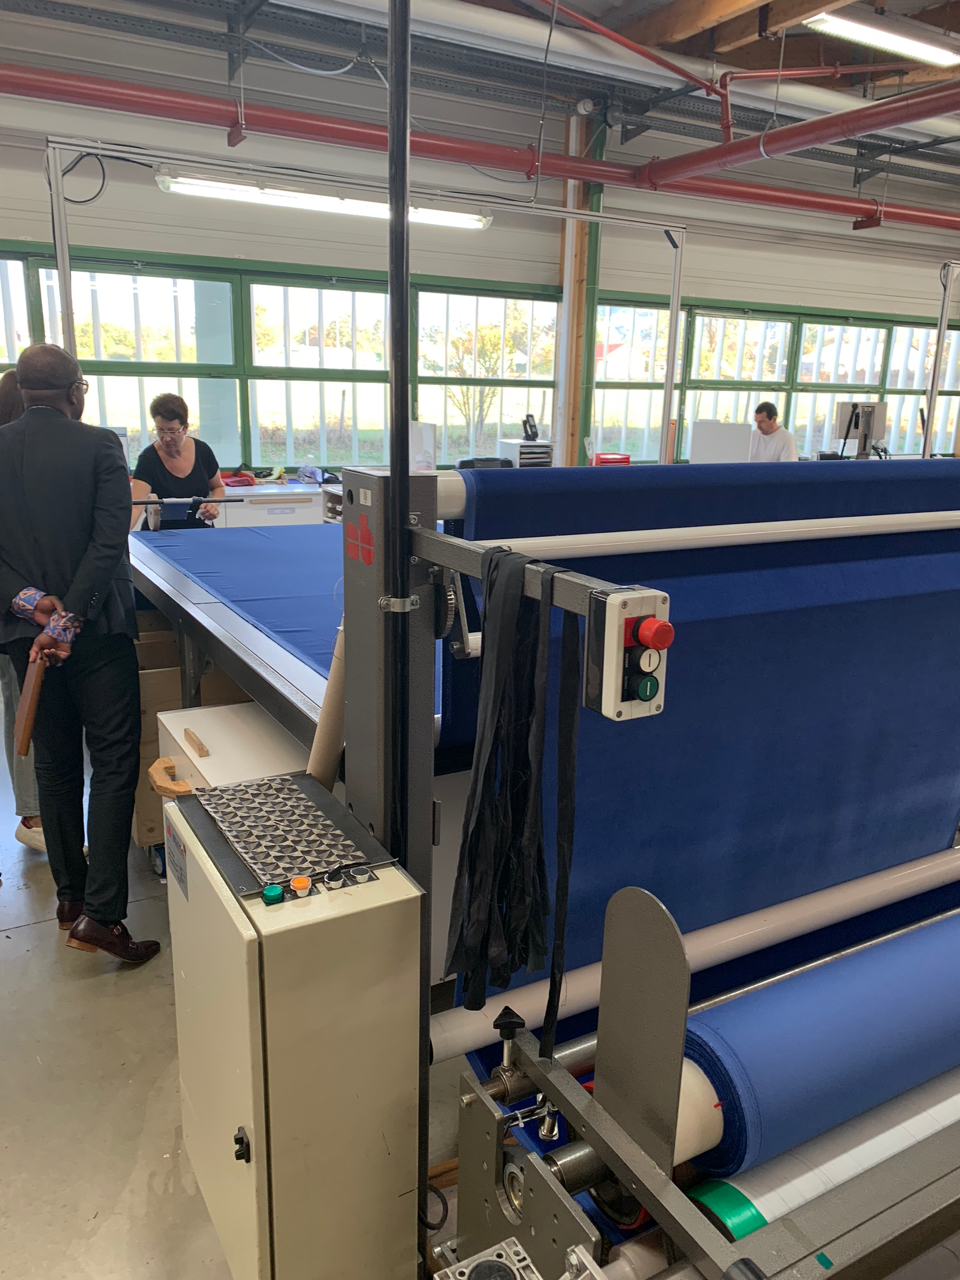 Each bolt of fabric is unrolled and hand-inspected